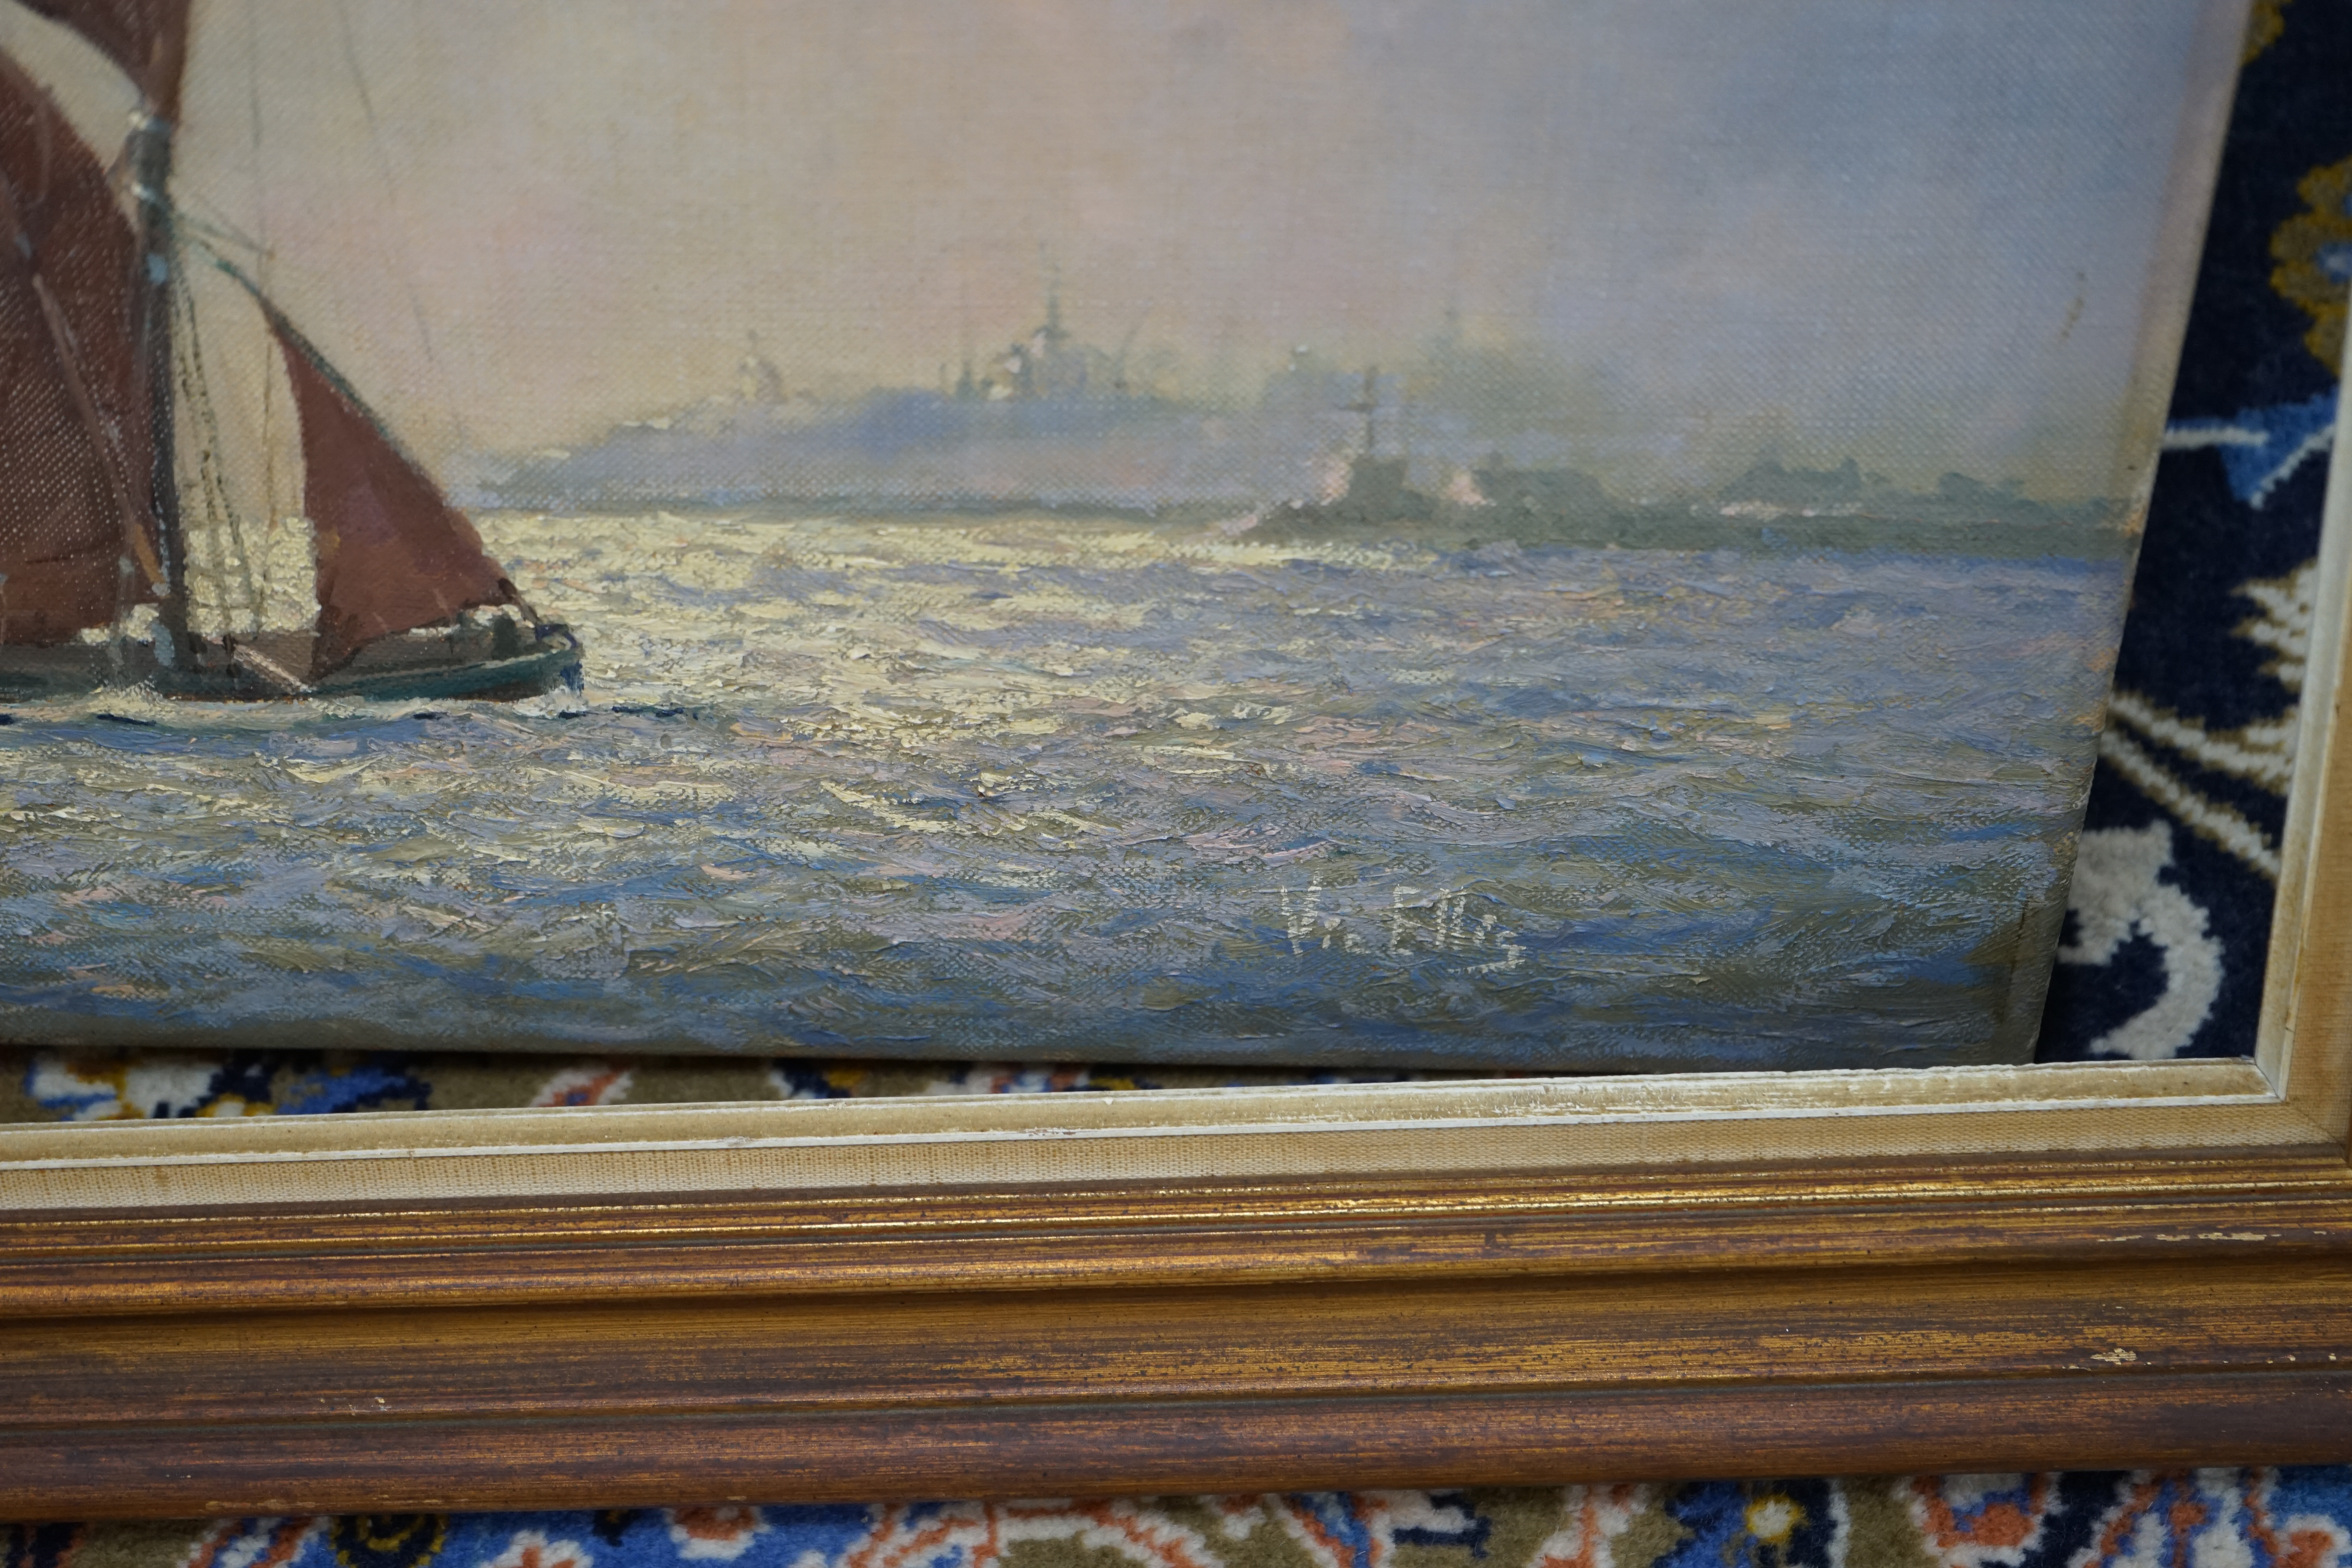 Victor William Ellis (1921-1984), oil on canvas, Estuary scene with boats, signed, 50 x 100cm. Condition - good